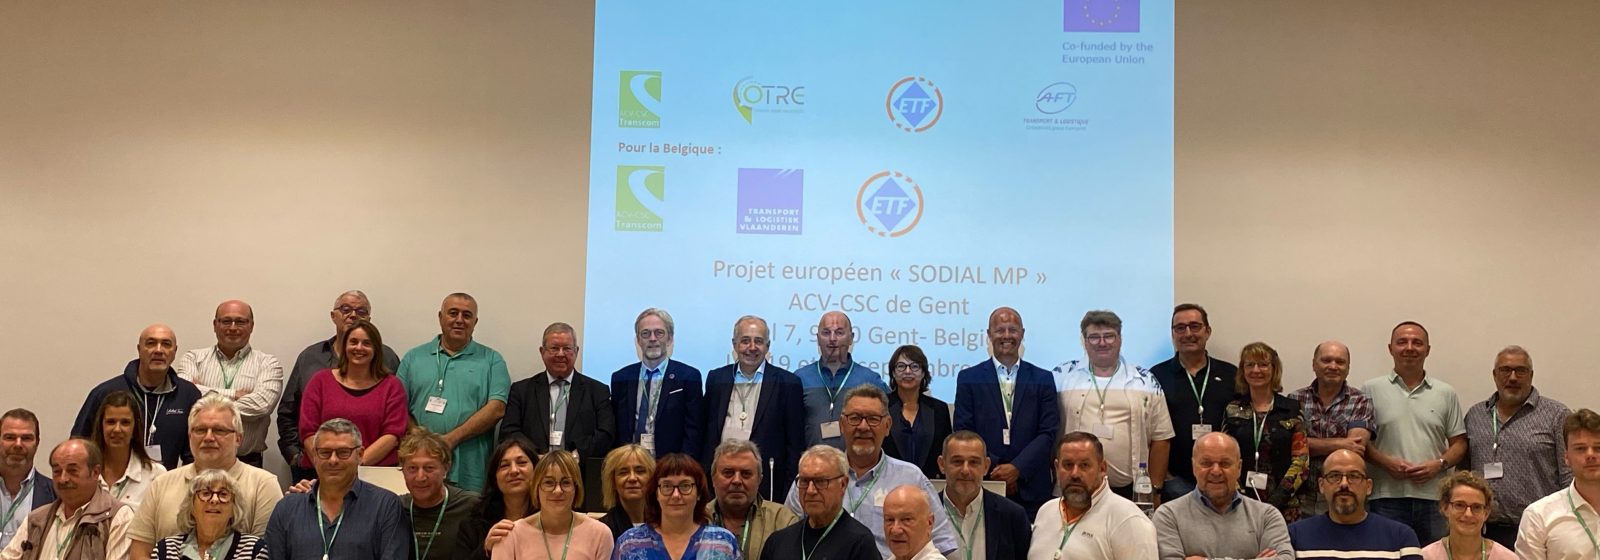 Seminarie SODIAL MP, het Europese project